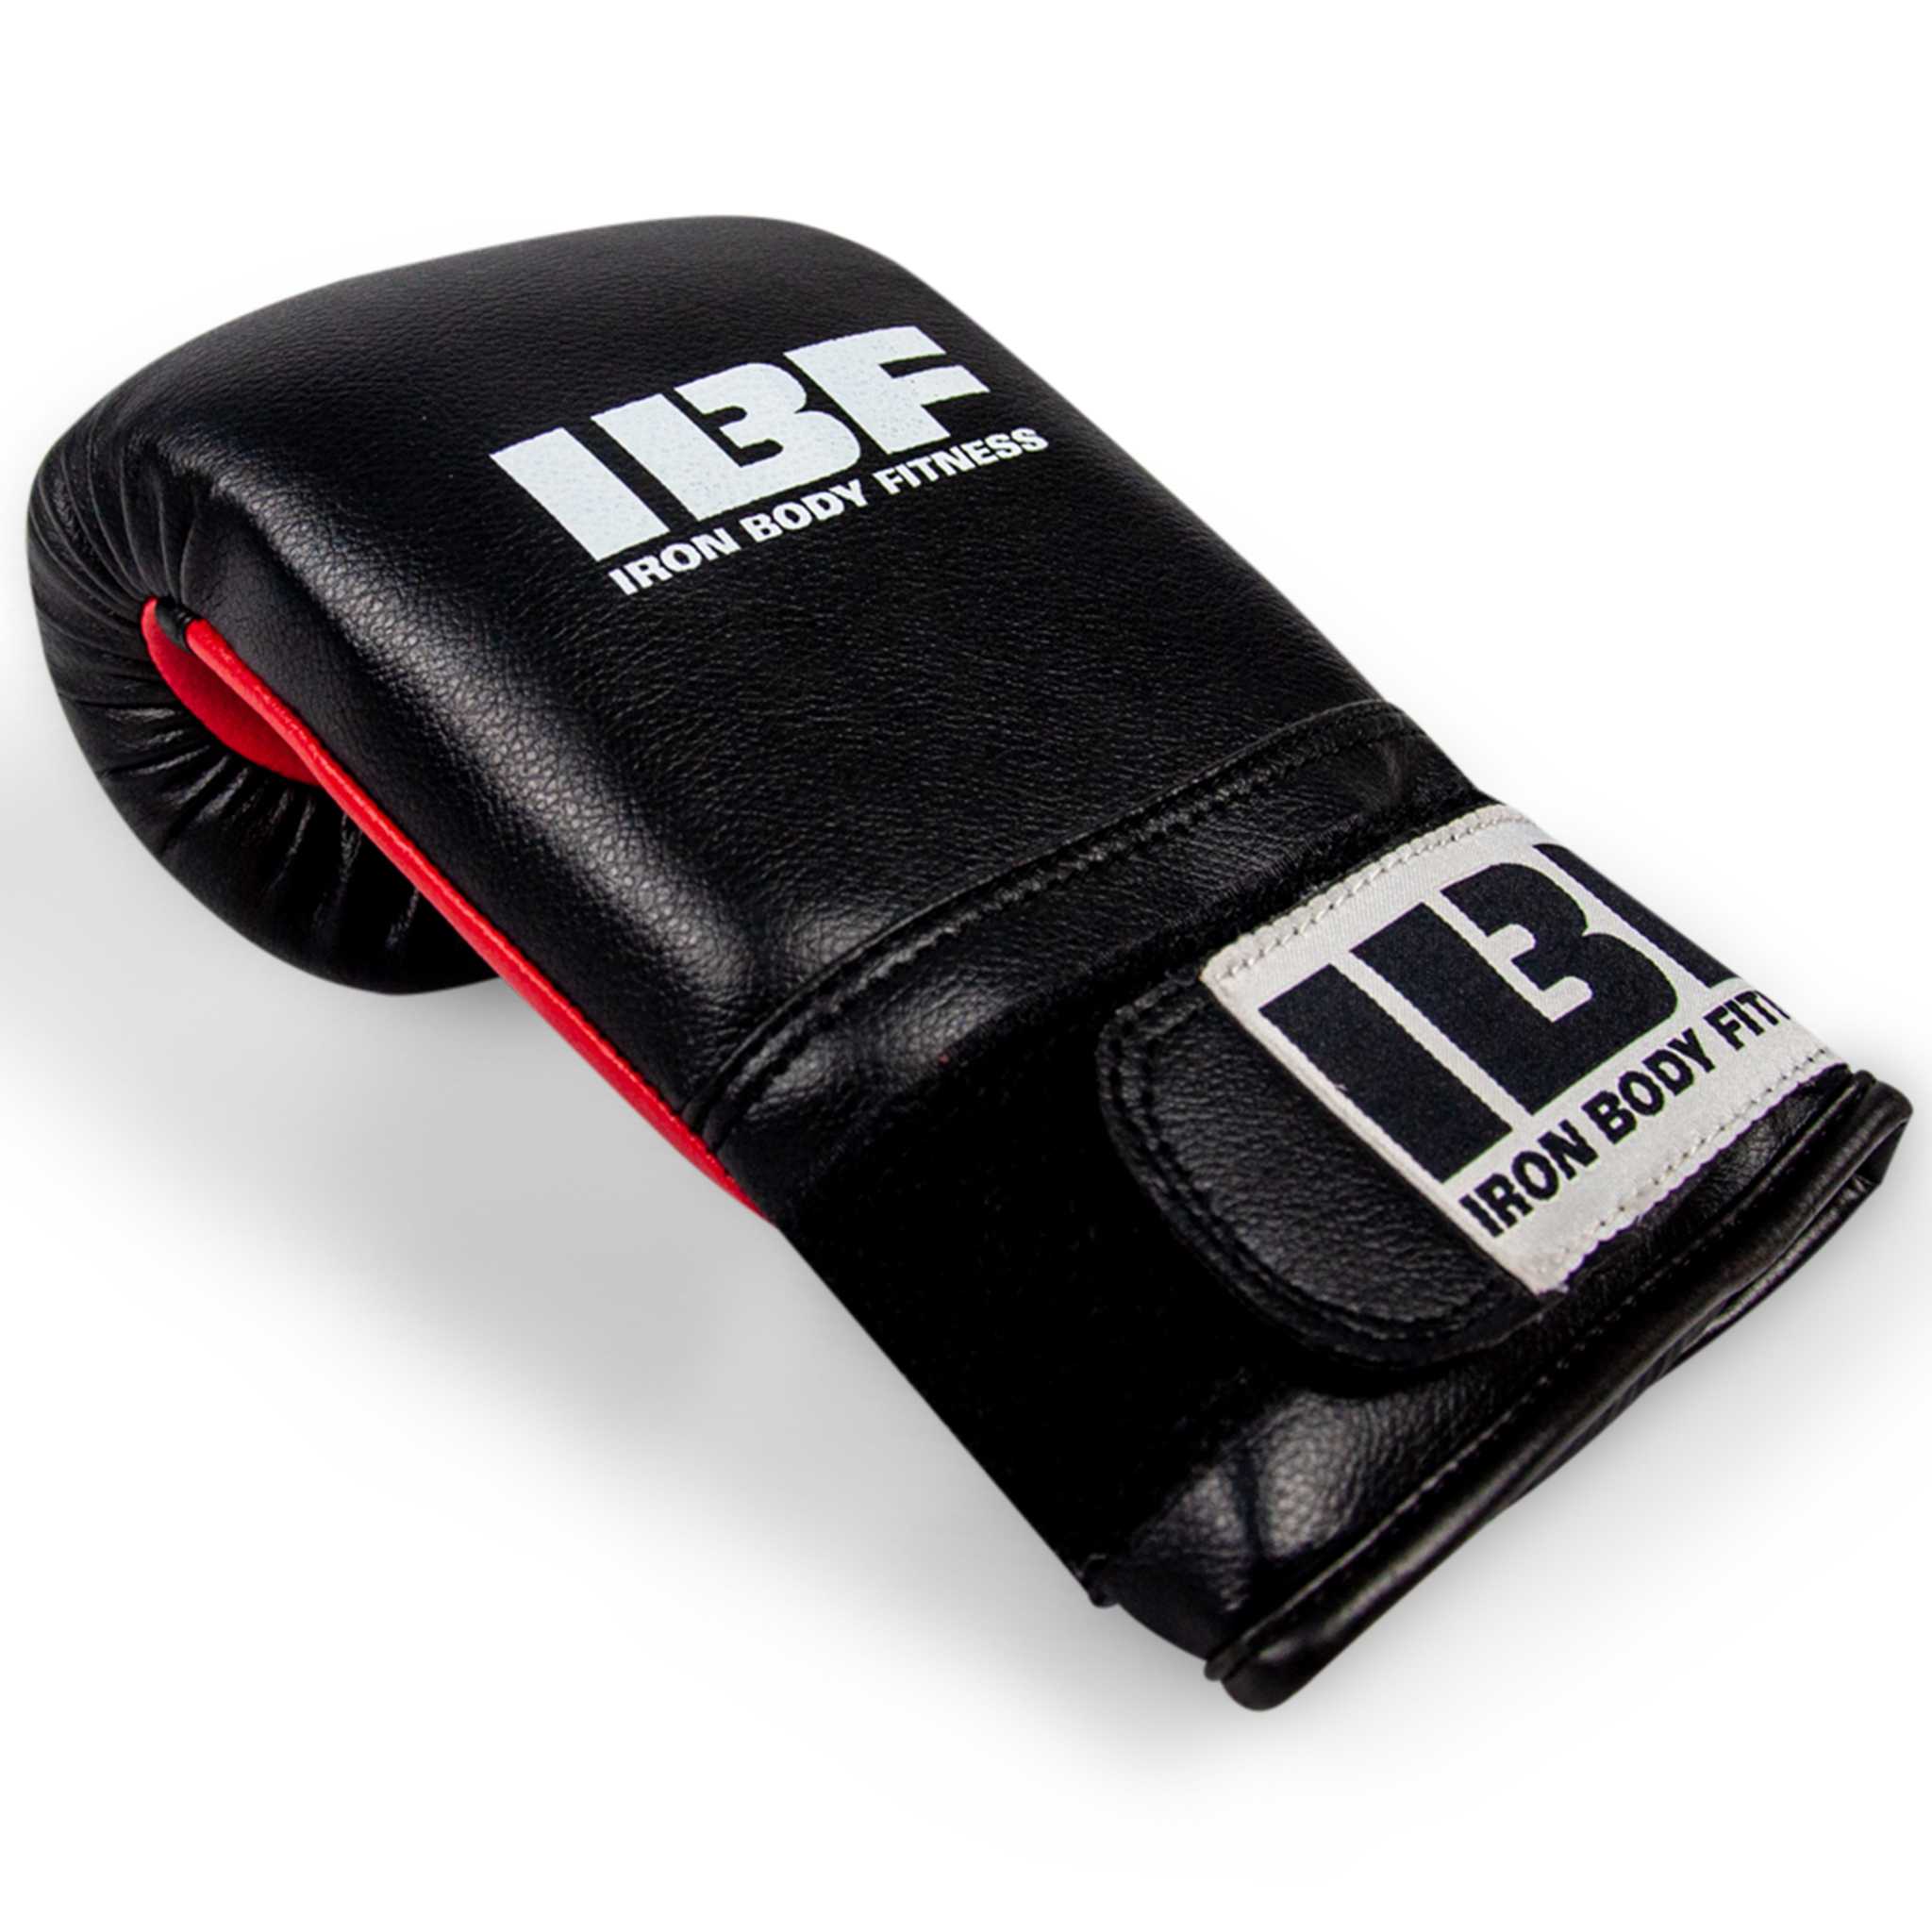 IBF Sport Series Bag Gloves for Boxing & MMA Training